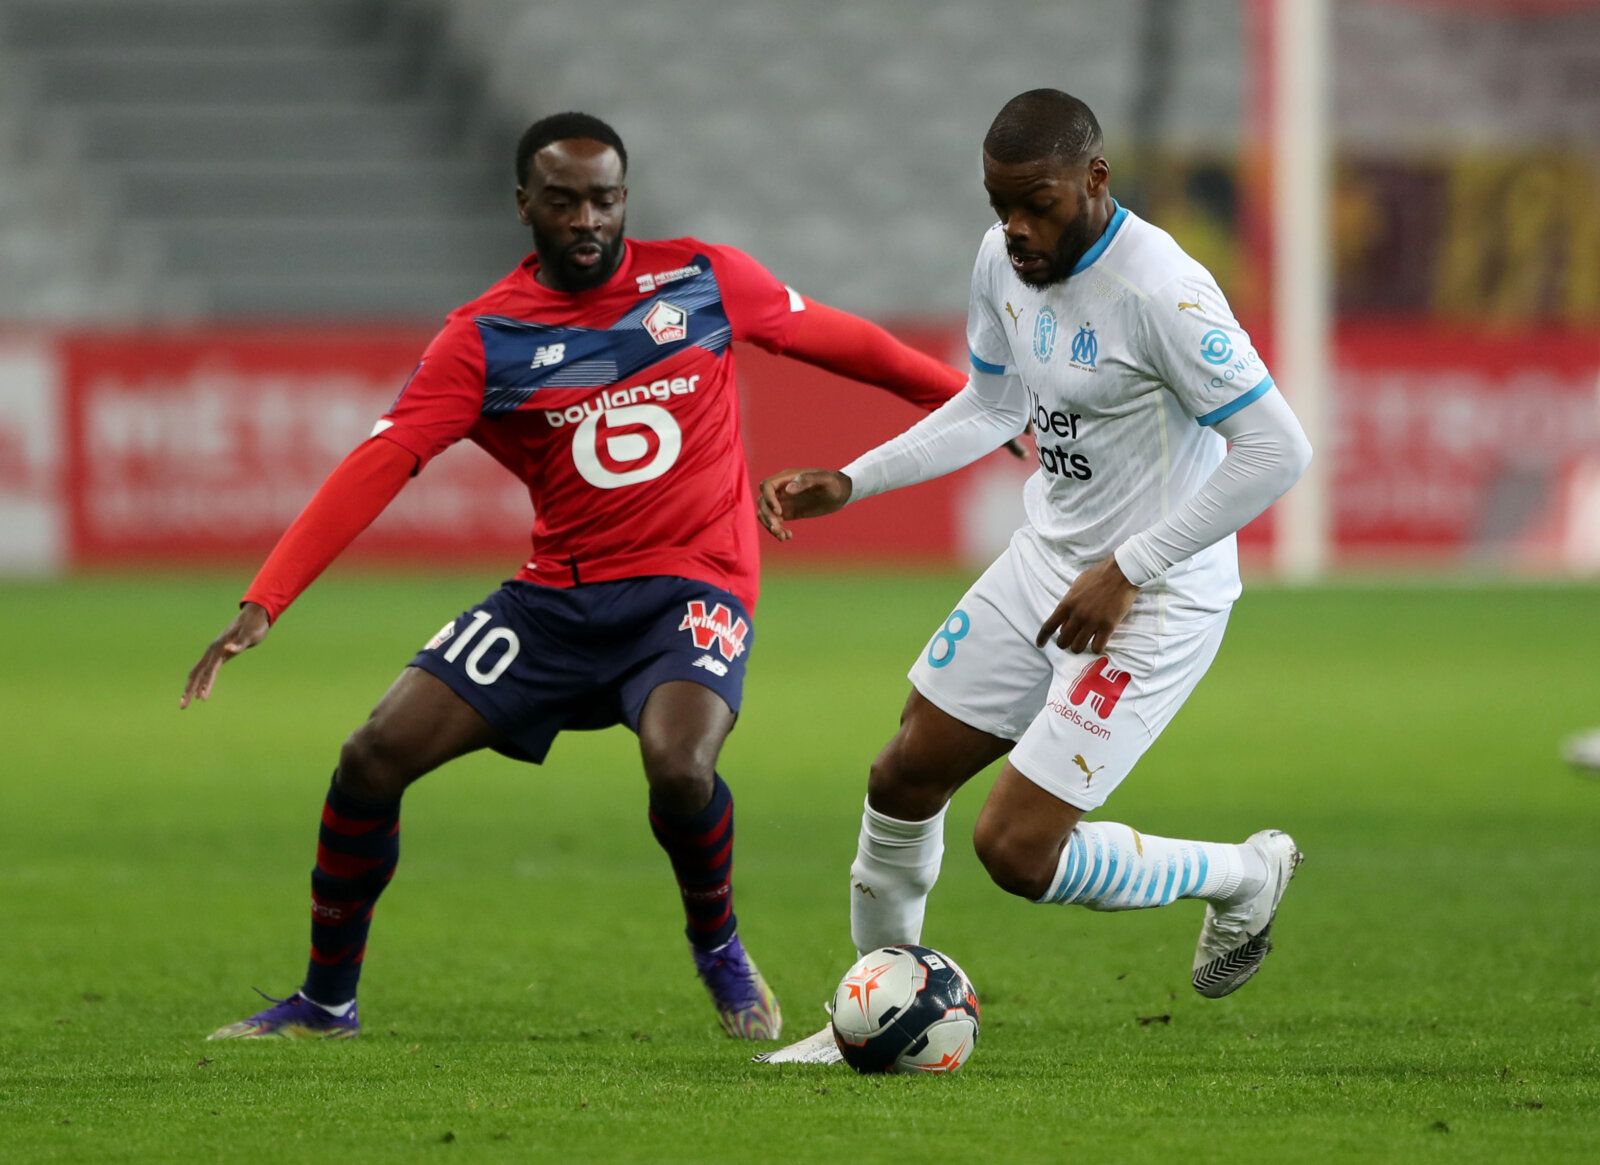 Soccer Football - Ligue 1 - Lille v Olympique de Marseille - Stade Pierre-Mauroy, Lille, France - March 3, 2021 Lille's Jonathan Ikone in action with Olympique de Marseille's Olivier Ntcham REUTERS/Pascal Rossignol